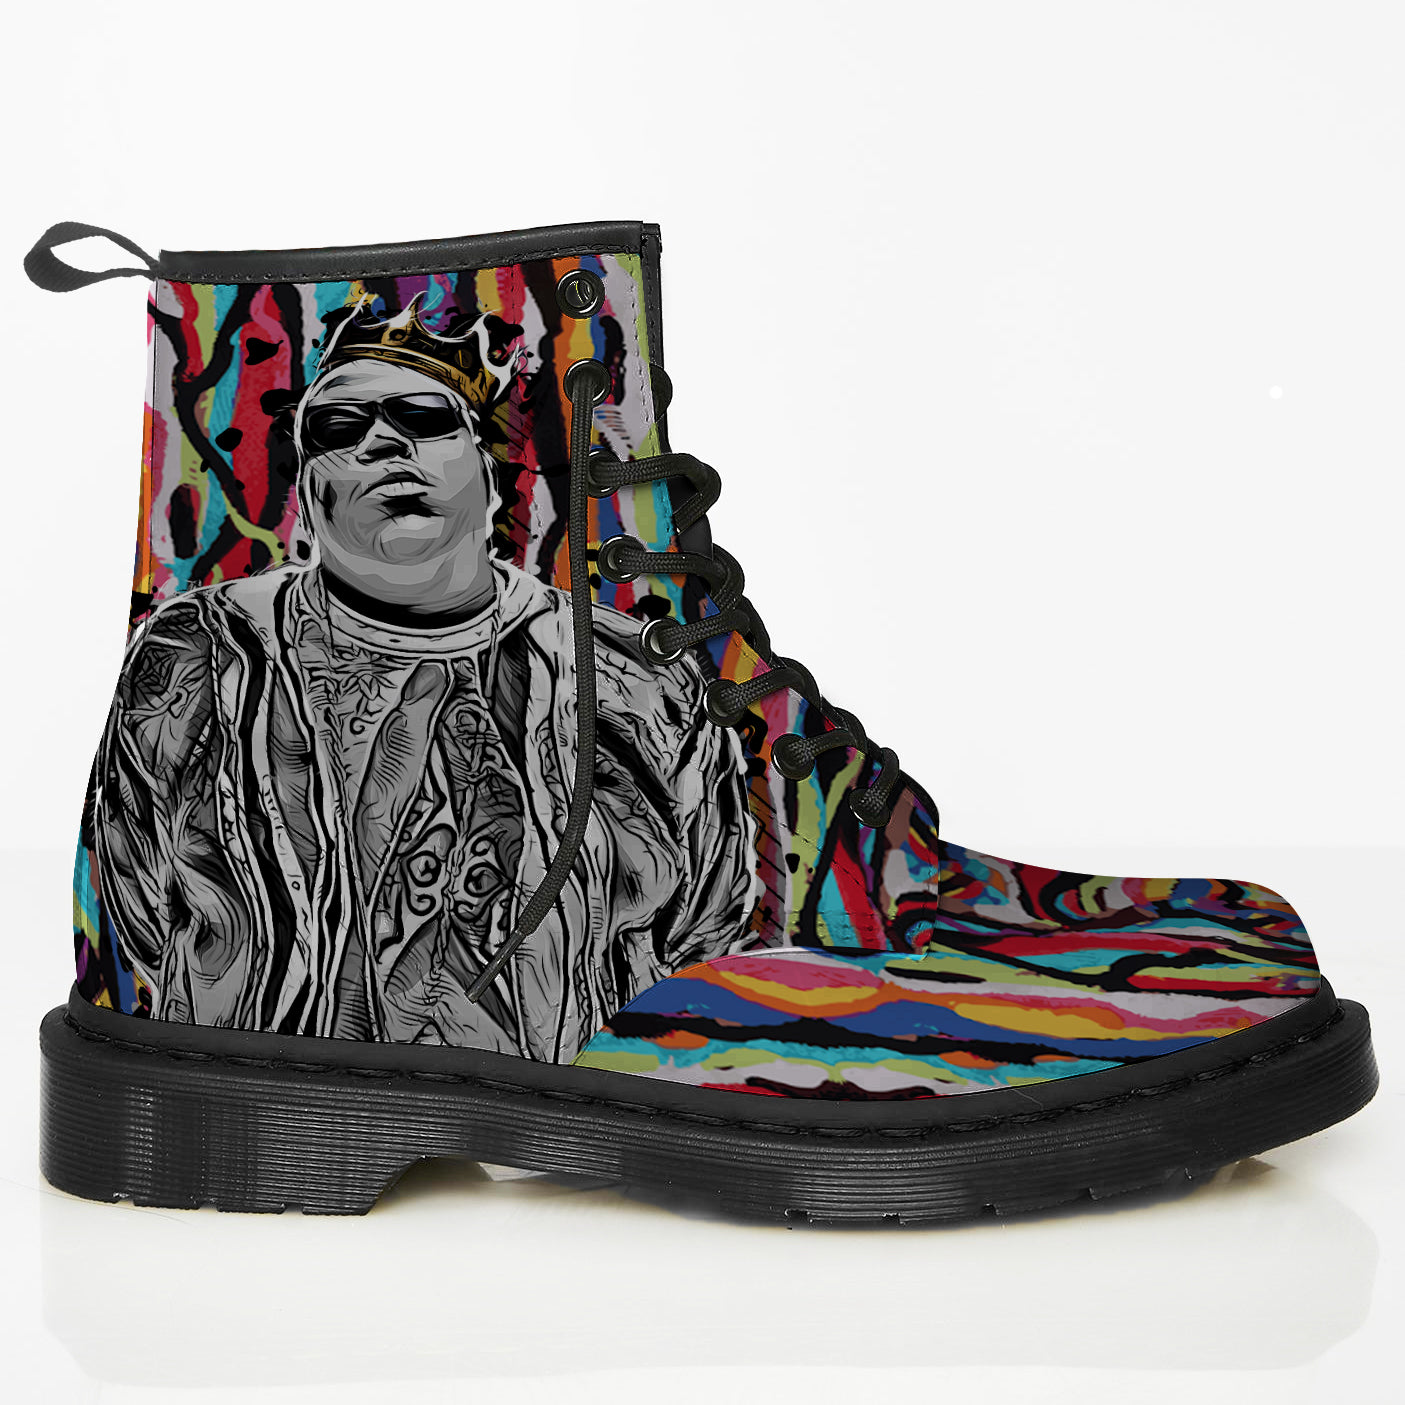 Notorious B.I.G. Boots